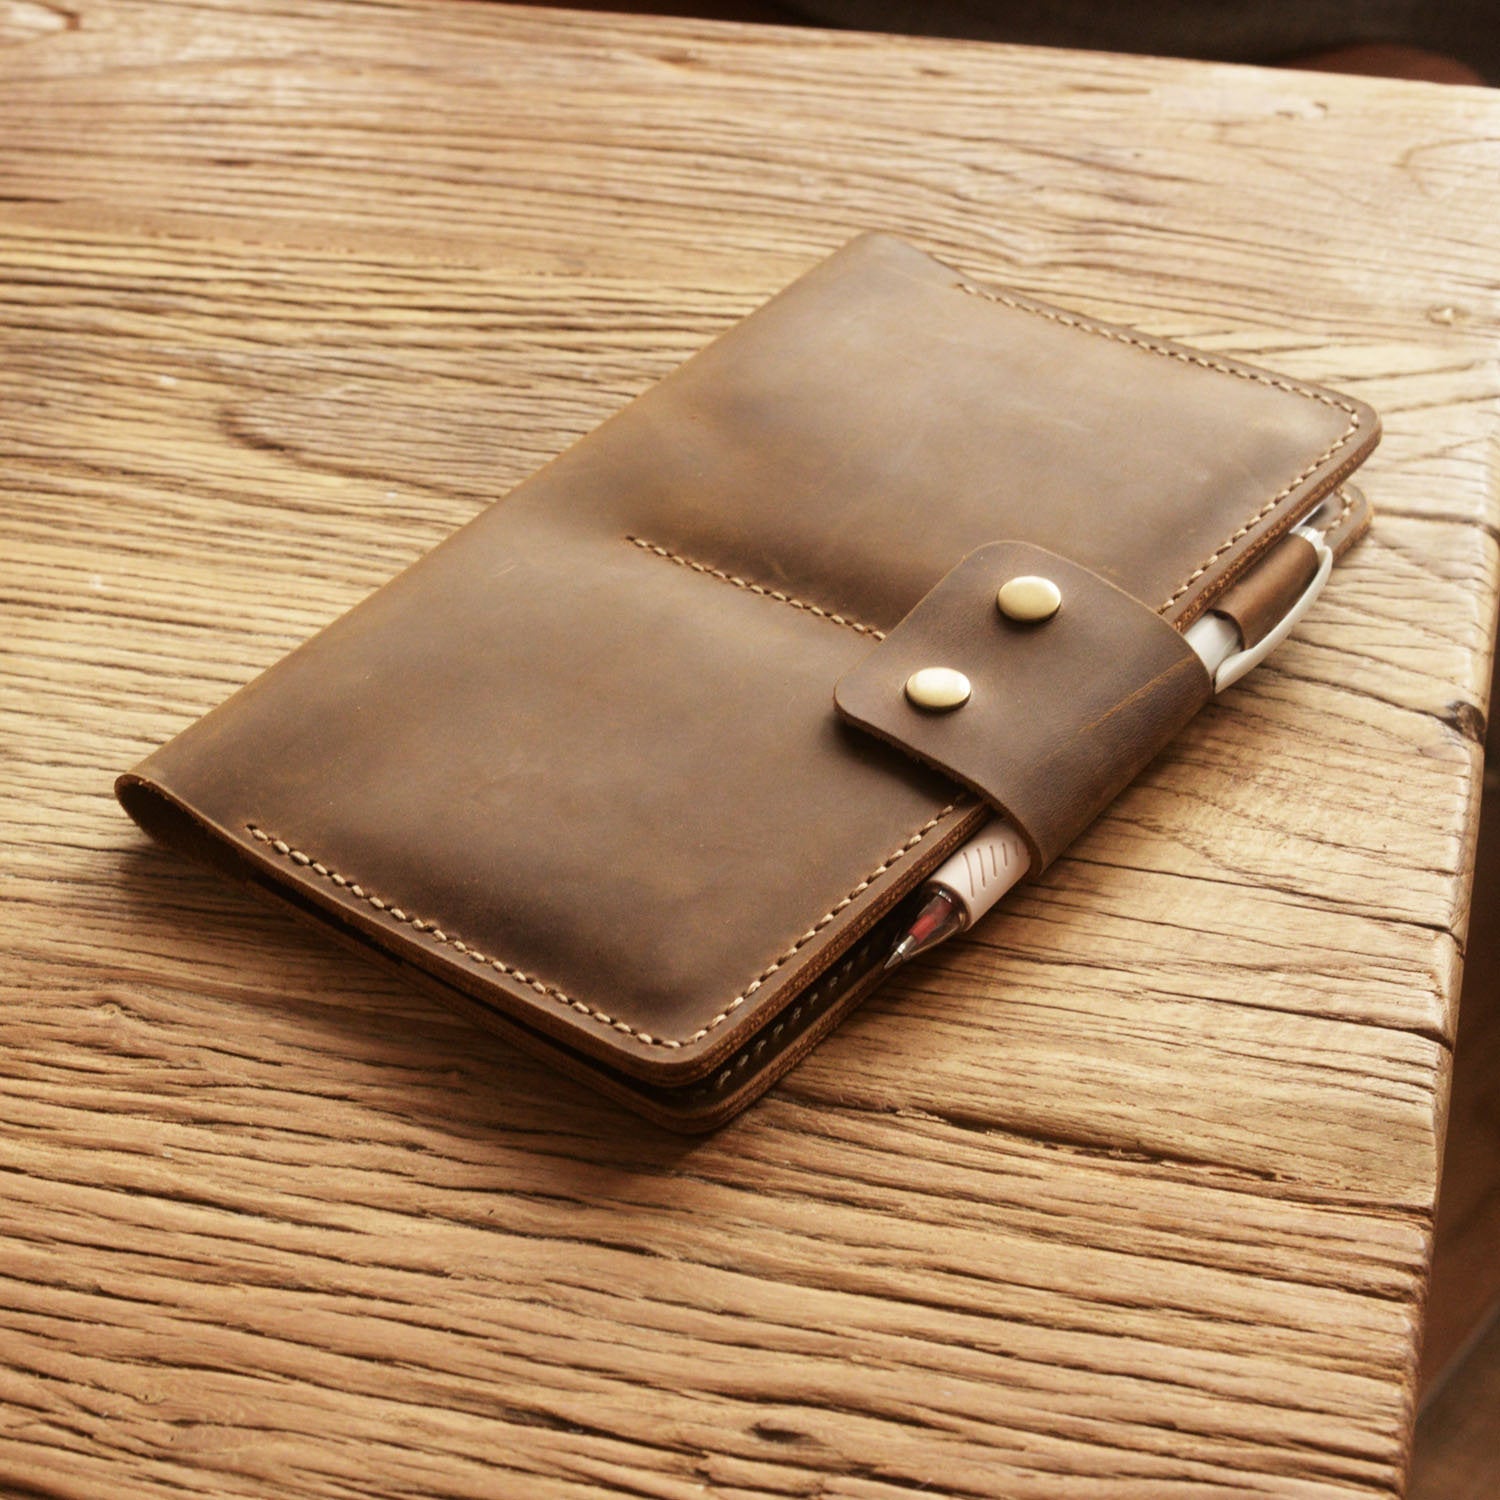 Personalized Leather Family 4 Passport Holder - PA001 - Extra Studio